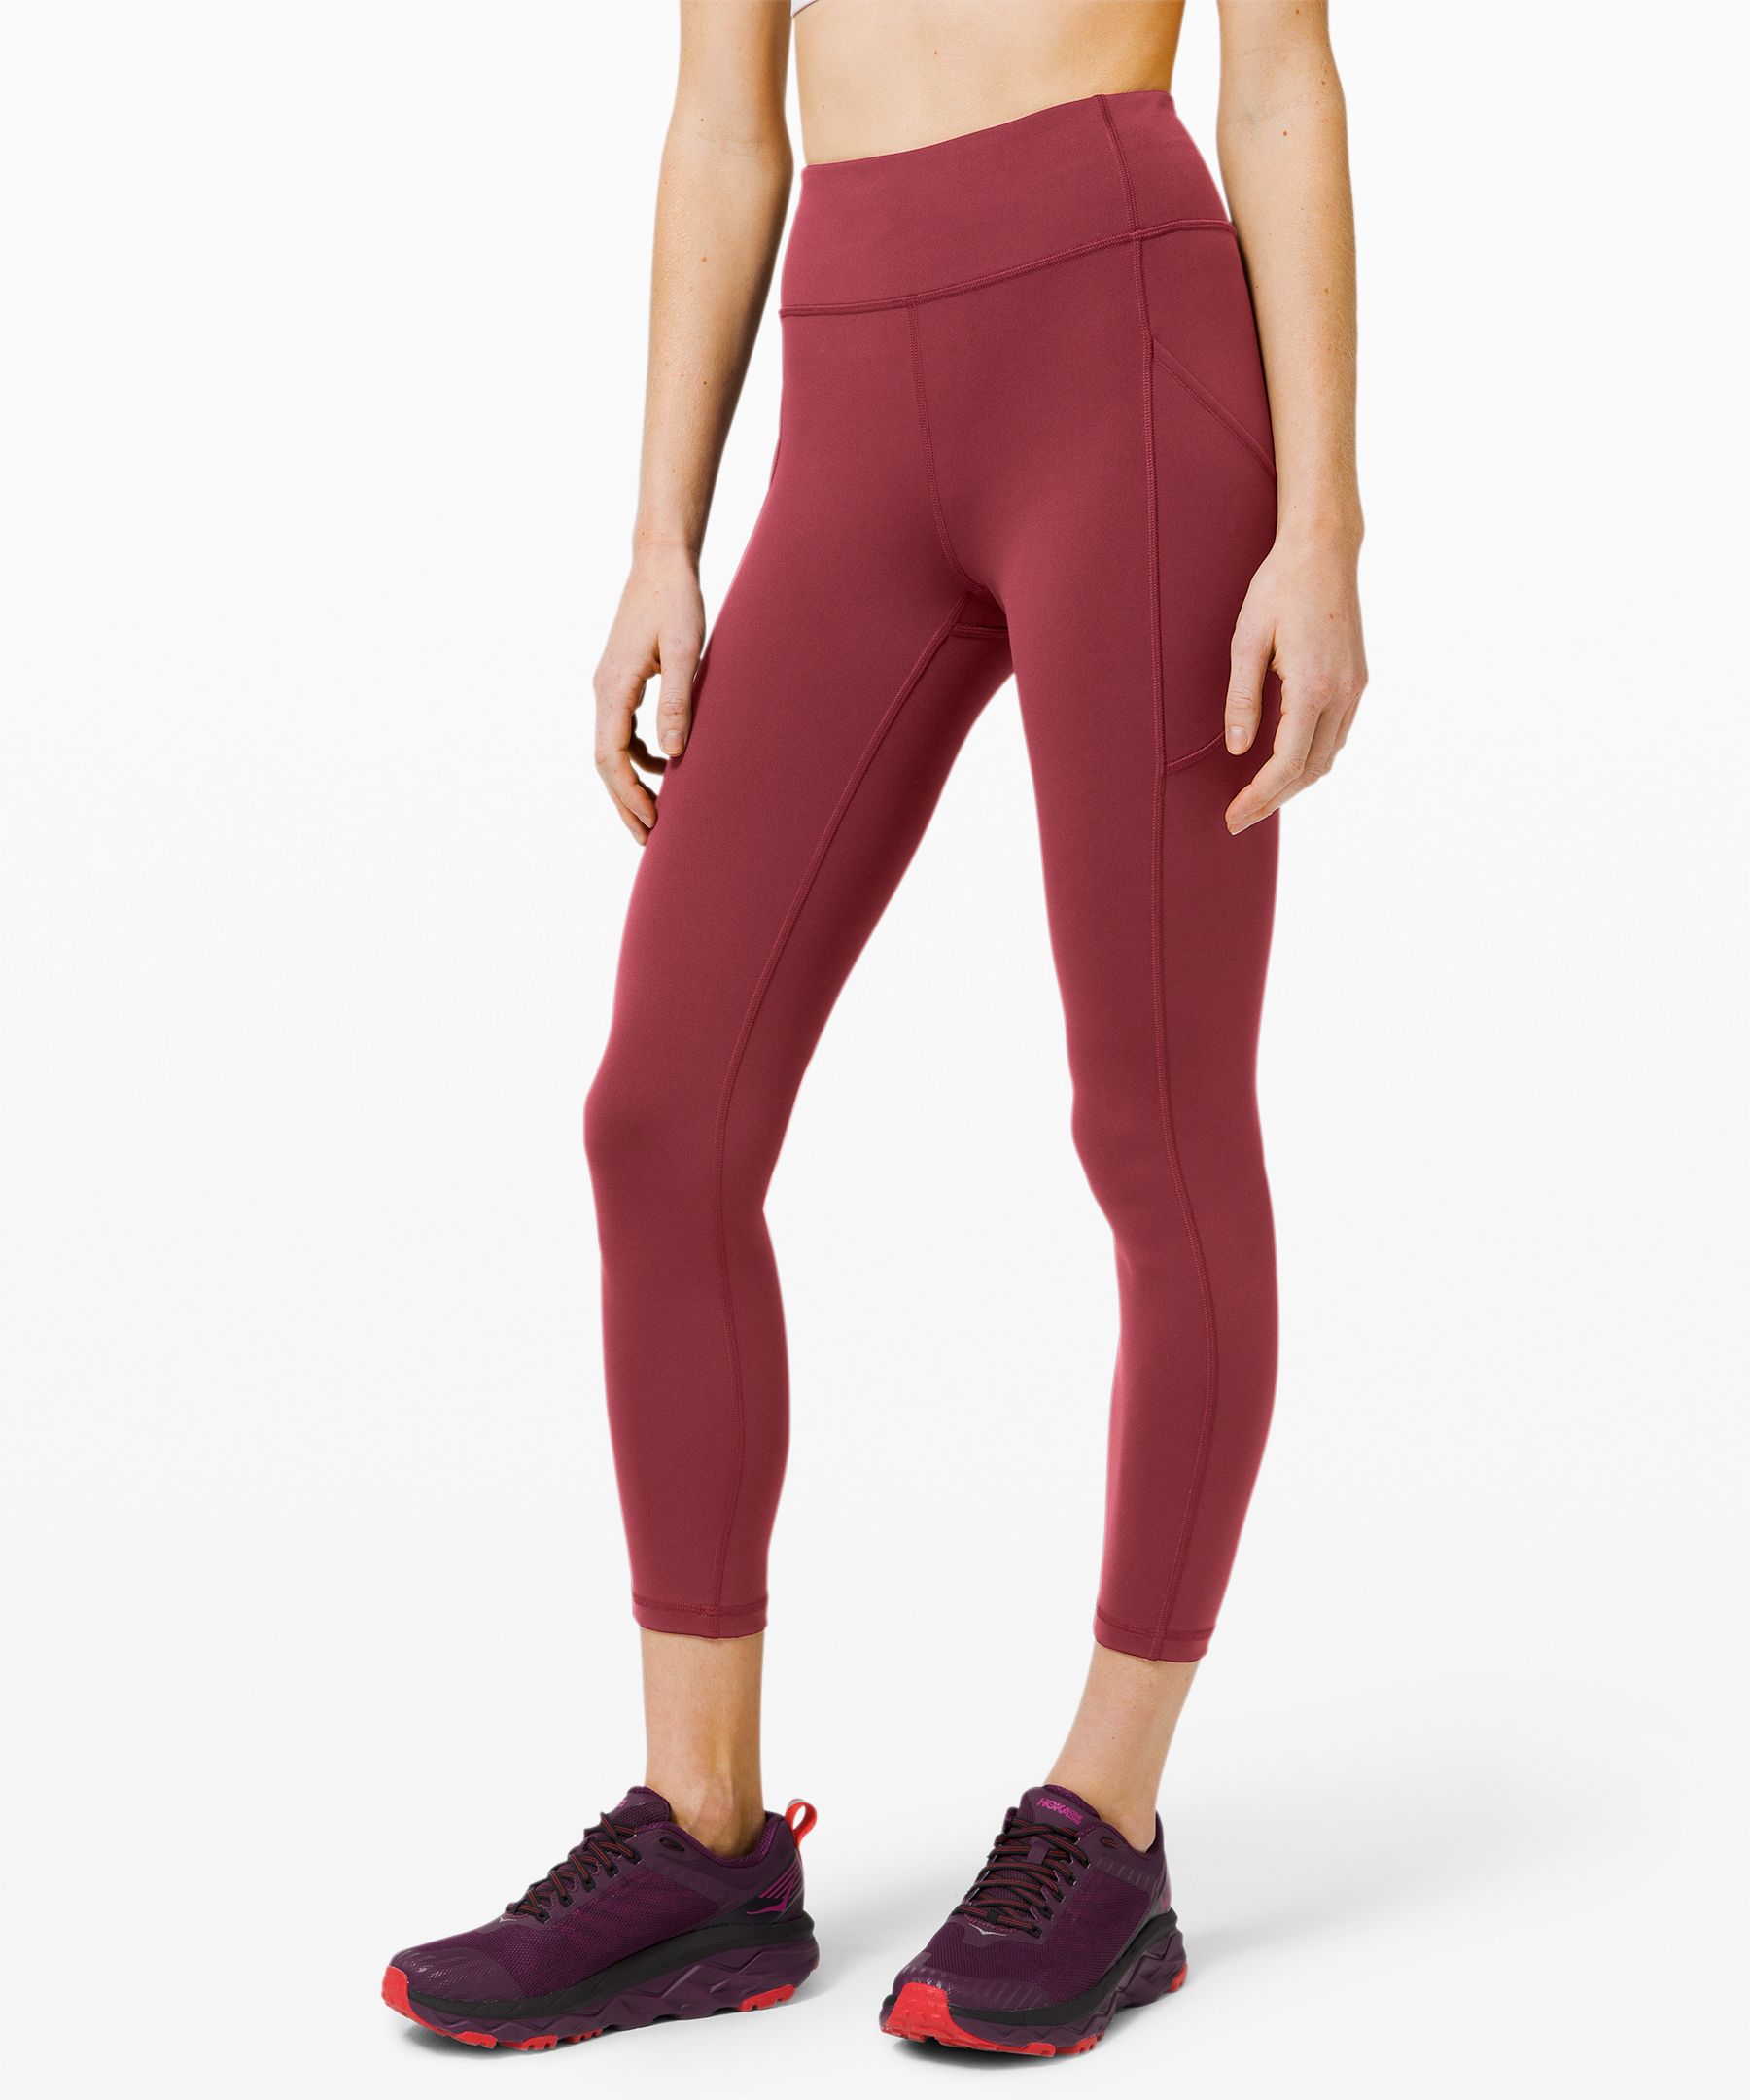 Are Invigorate Leggings good for hot yoga? I used to love In Movements. I  love Aligns, and I also like WunderTrains. I don't want them to be  compressive or too thick. I